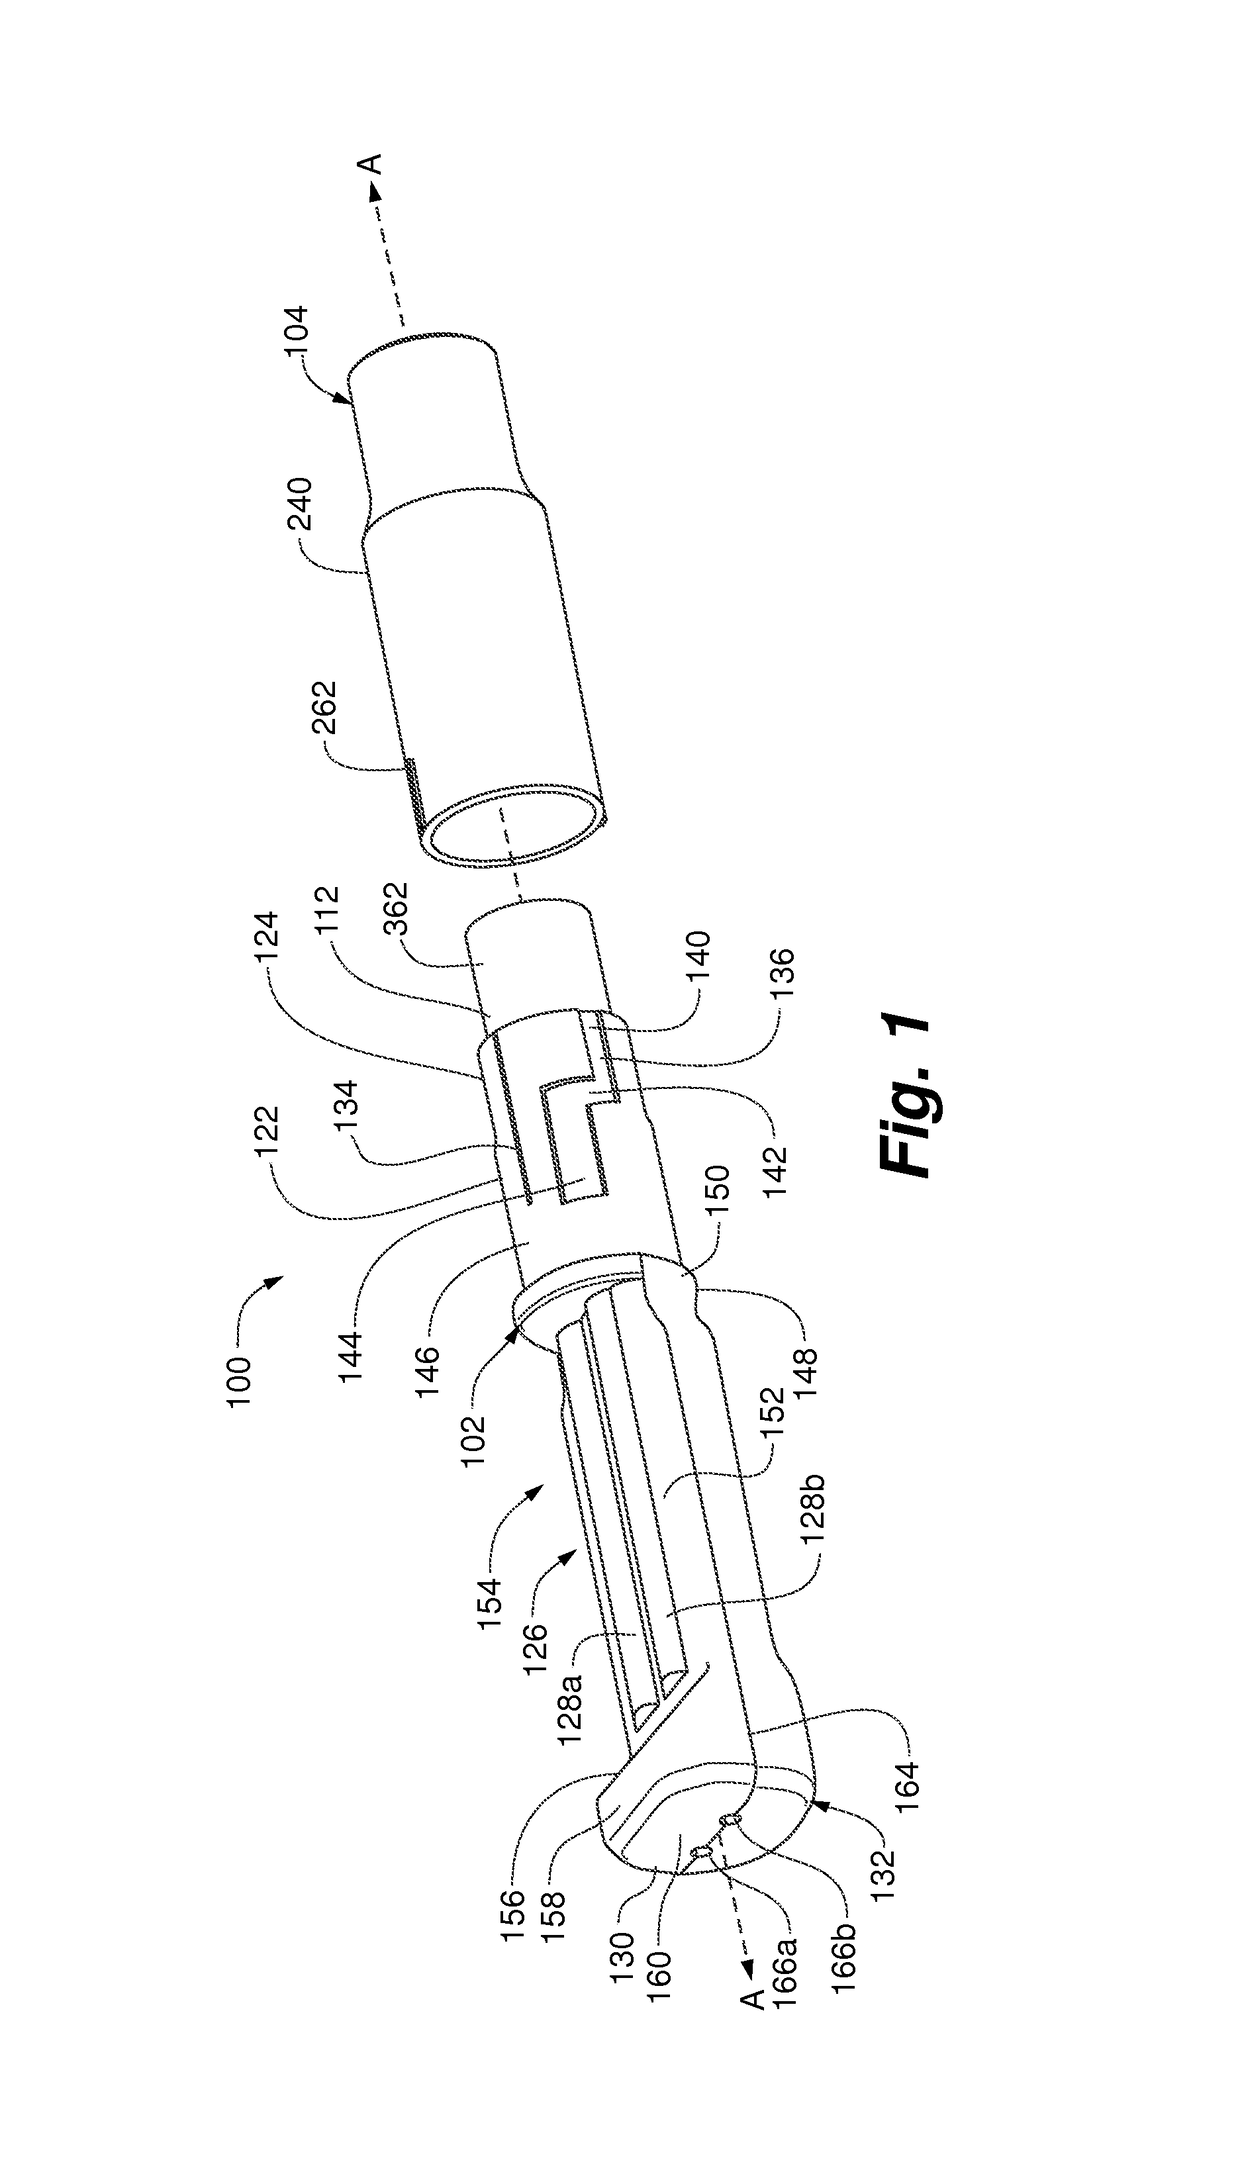 Multi-stage oral-fluid testing device